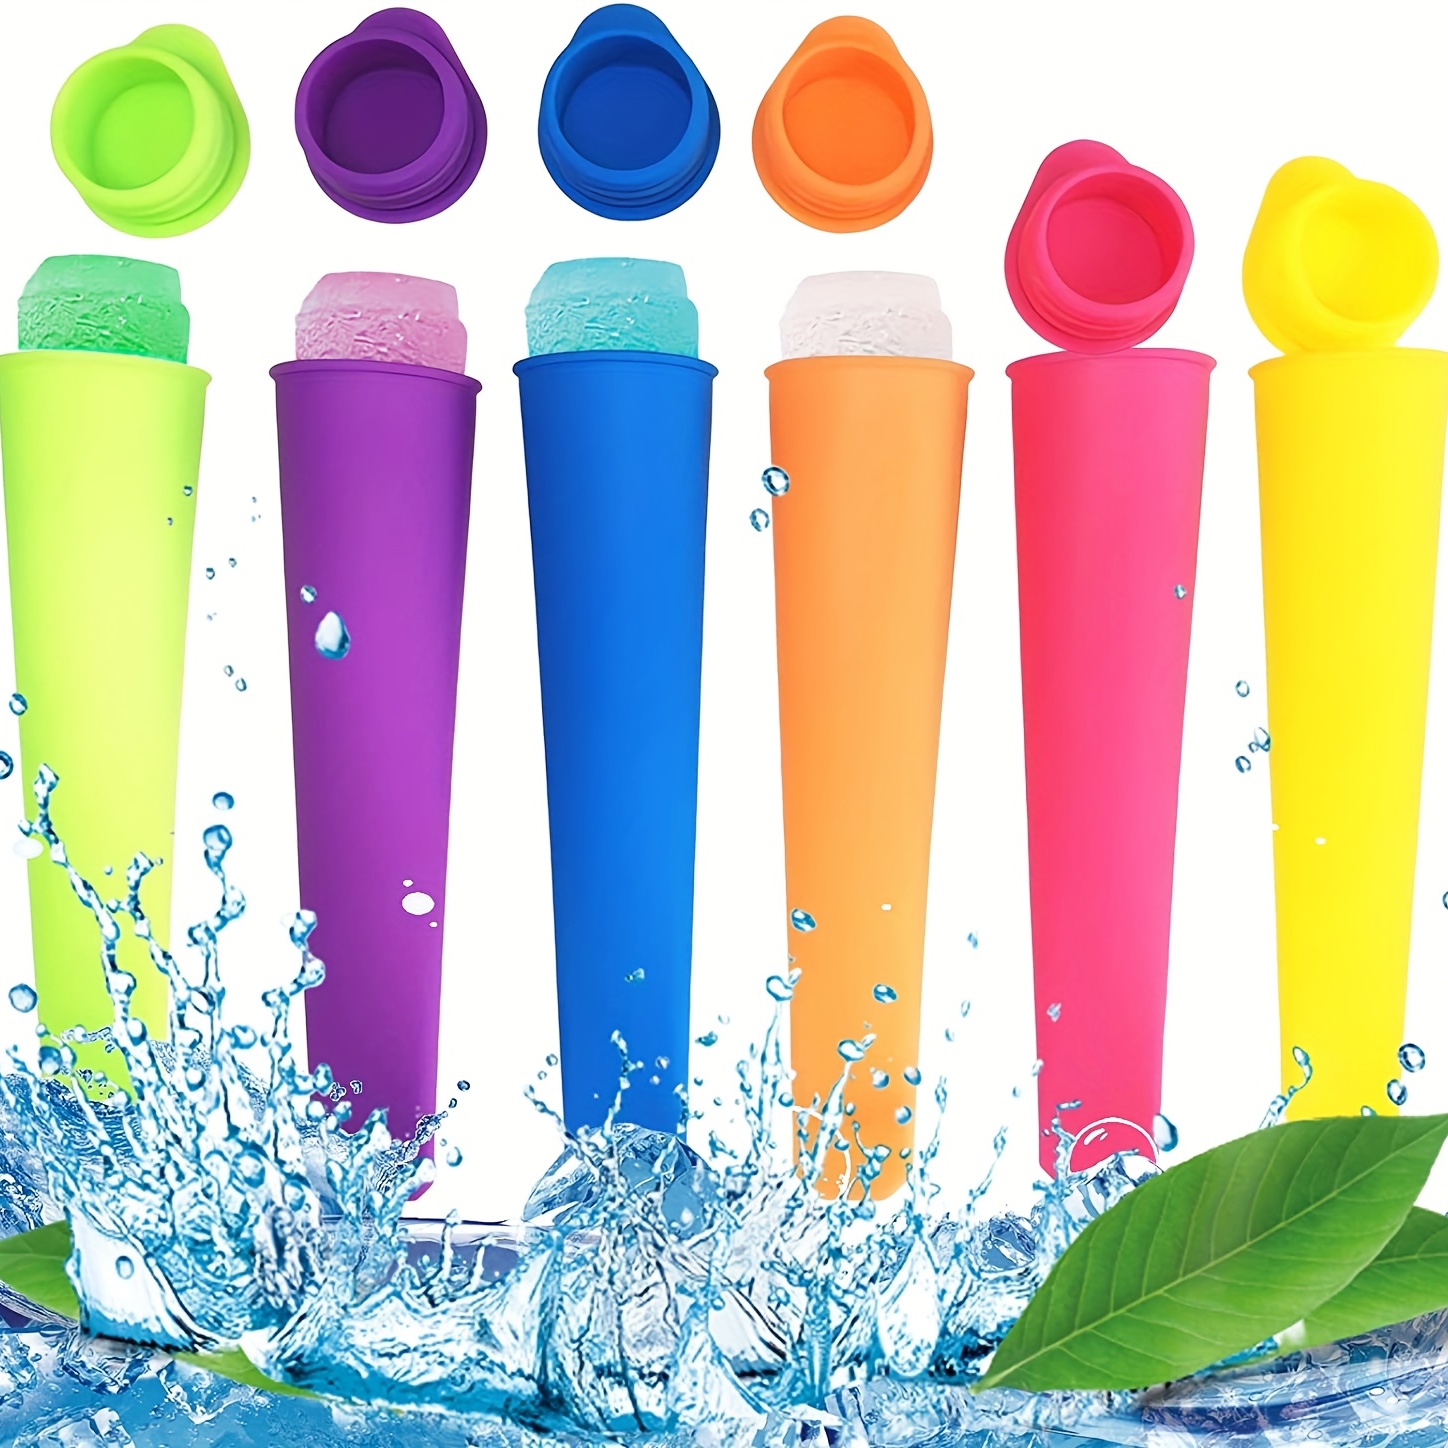 Homemade Popsicle Molds Shapes, Silicone Frozen Ice Popsicle Maker-BPA  Free, with 12 Reusable Popsicle Sticks 2023 - US $21.99